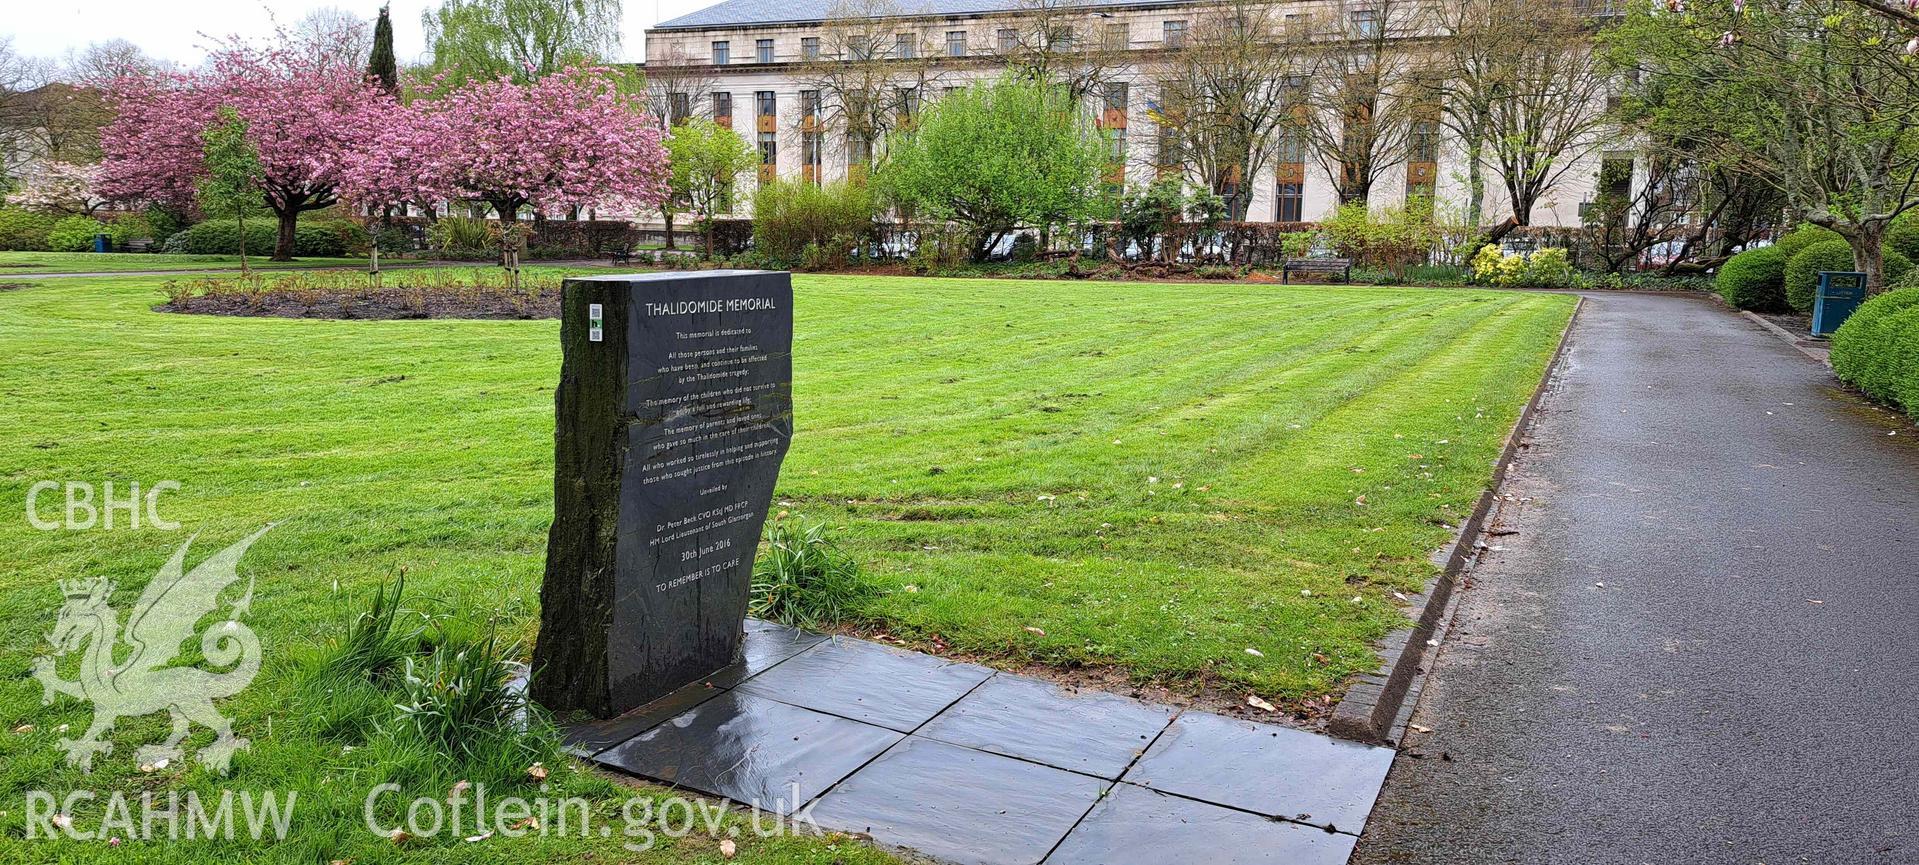 Digital image of the Thalidomide memorial in Alexandra Gardens, Cathays Park, Cardiff, taken on 10/04/2024.